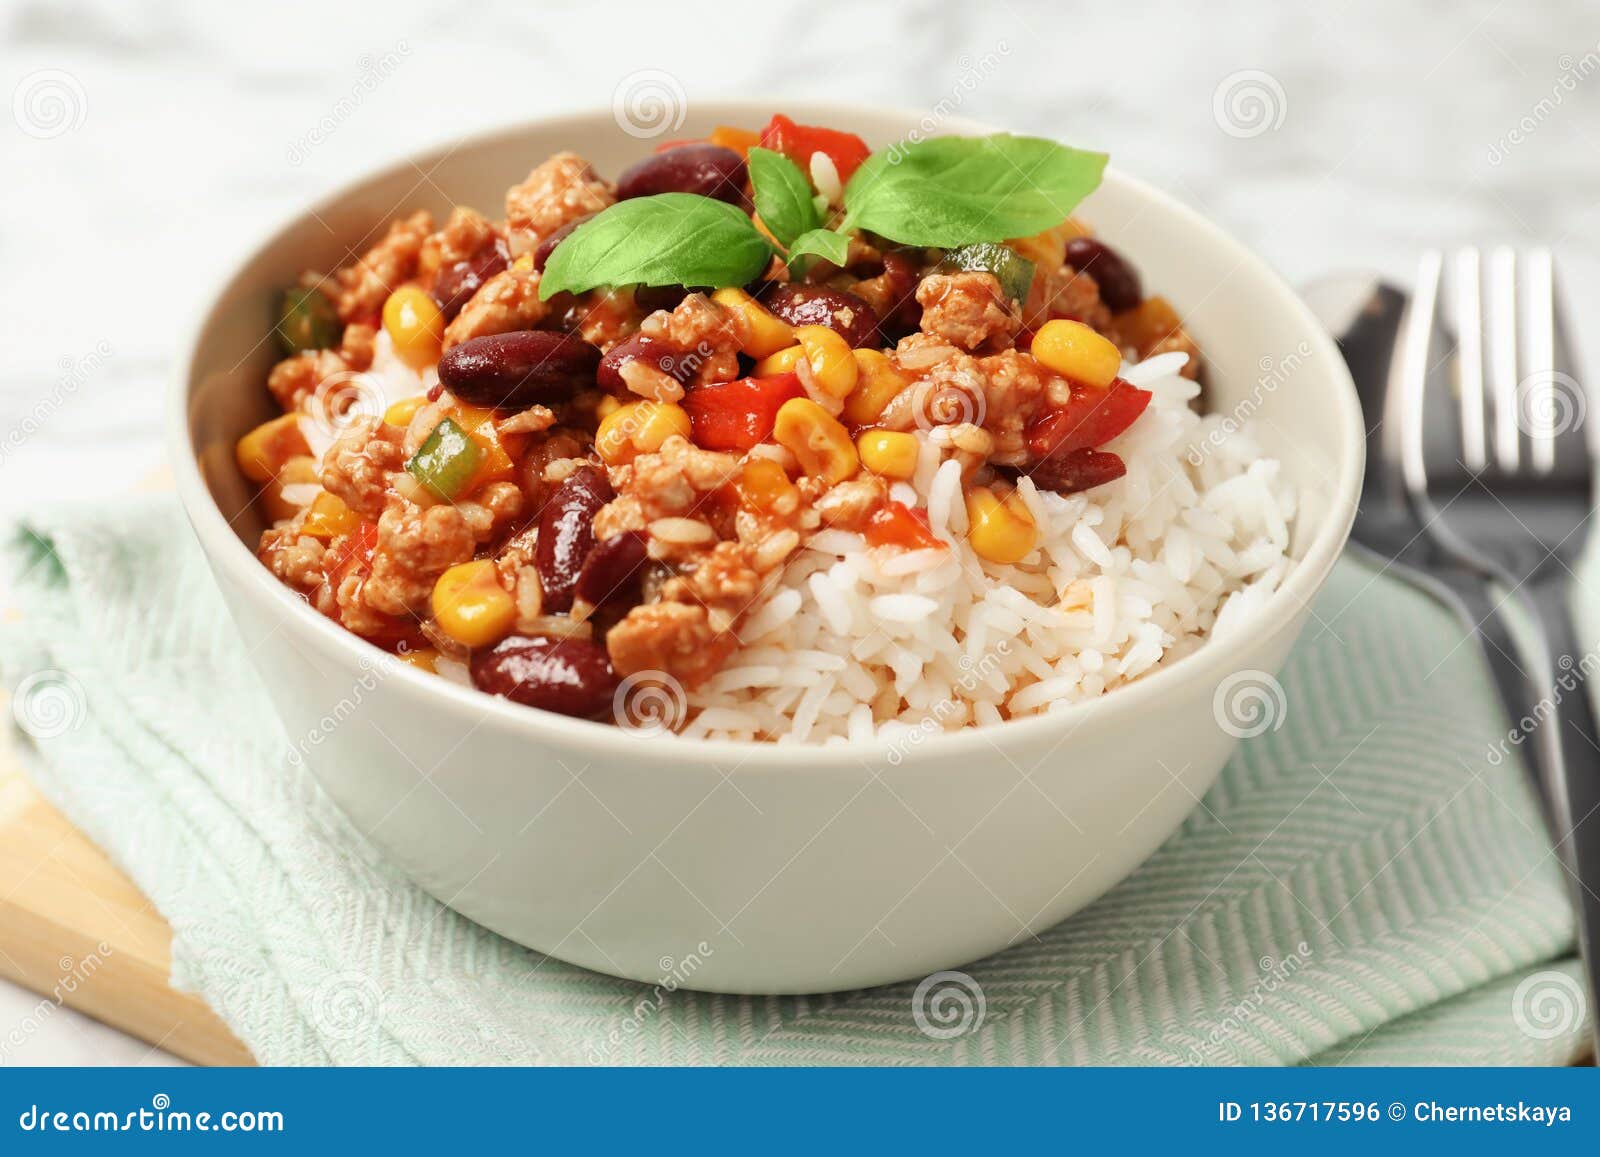 tasty chili con carne served with rice in bowl